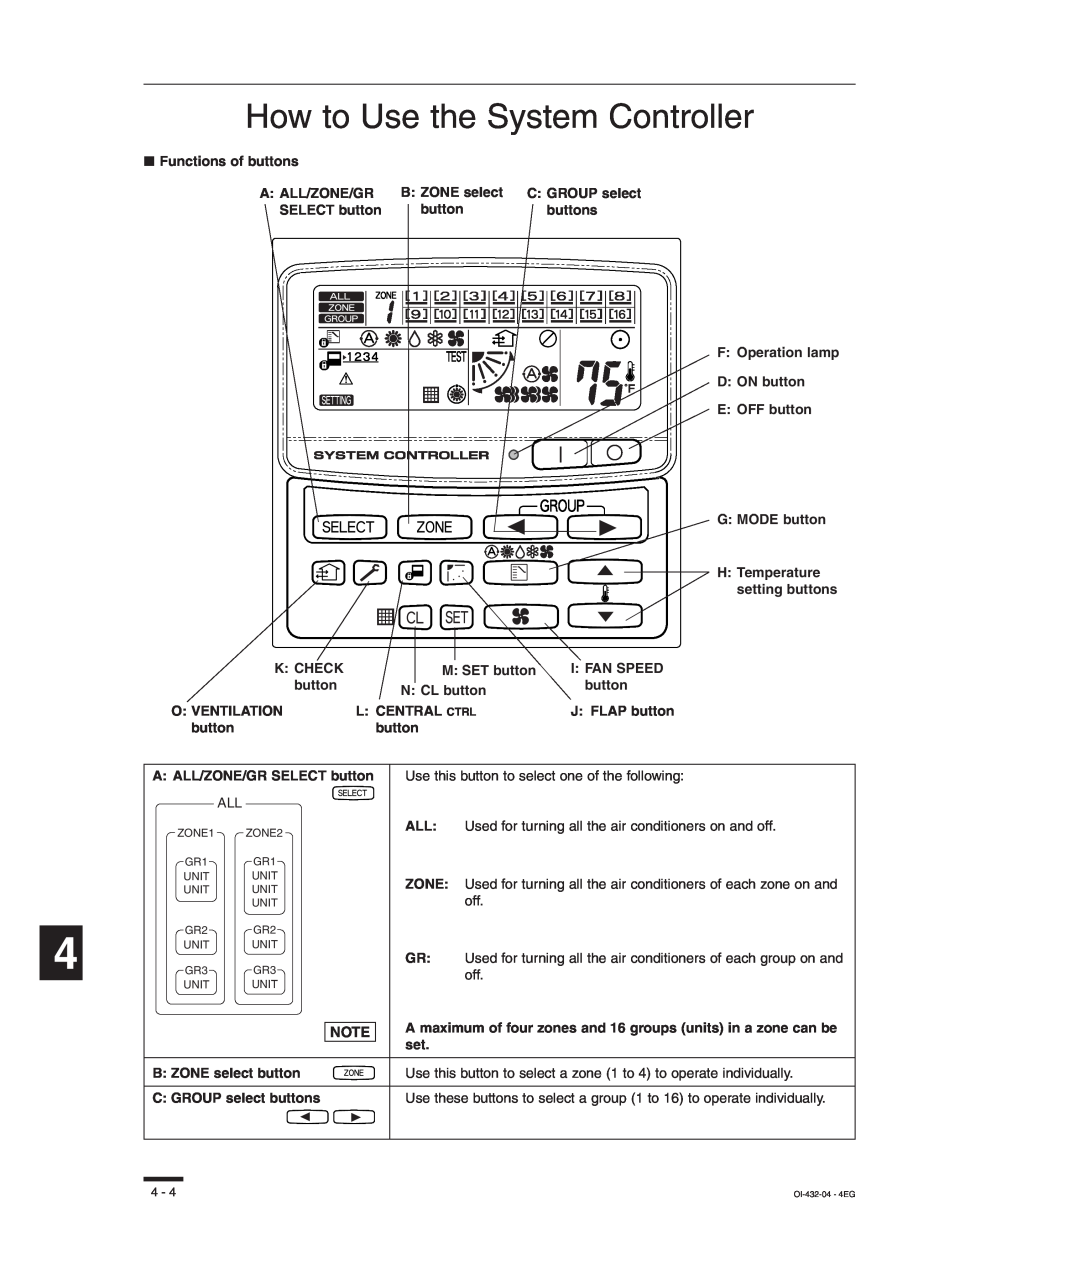 Sanyo TM-SH80UG, SHA-KC64UG, RCS-SH80UG, RCS-SH80UA instruction manual How to Use the System Controller 